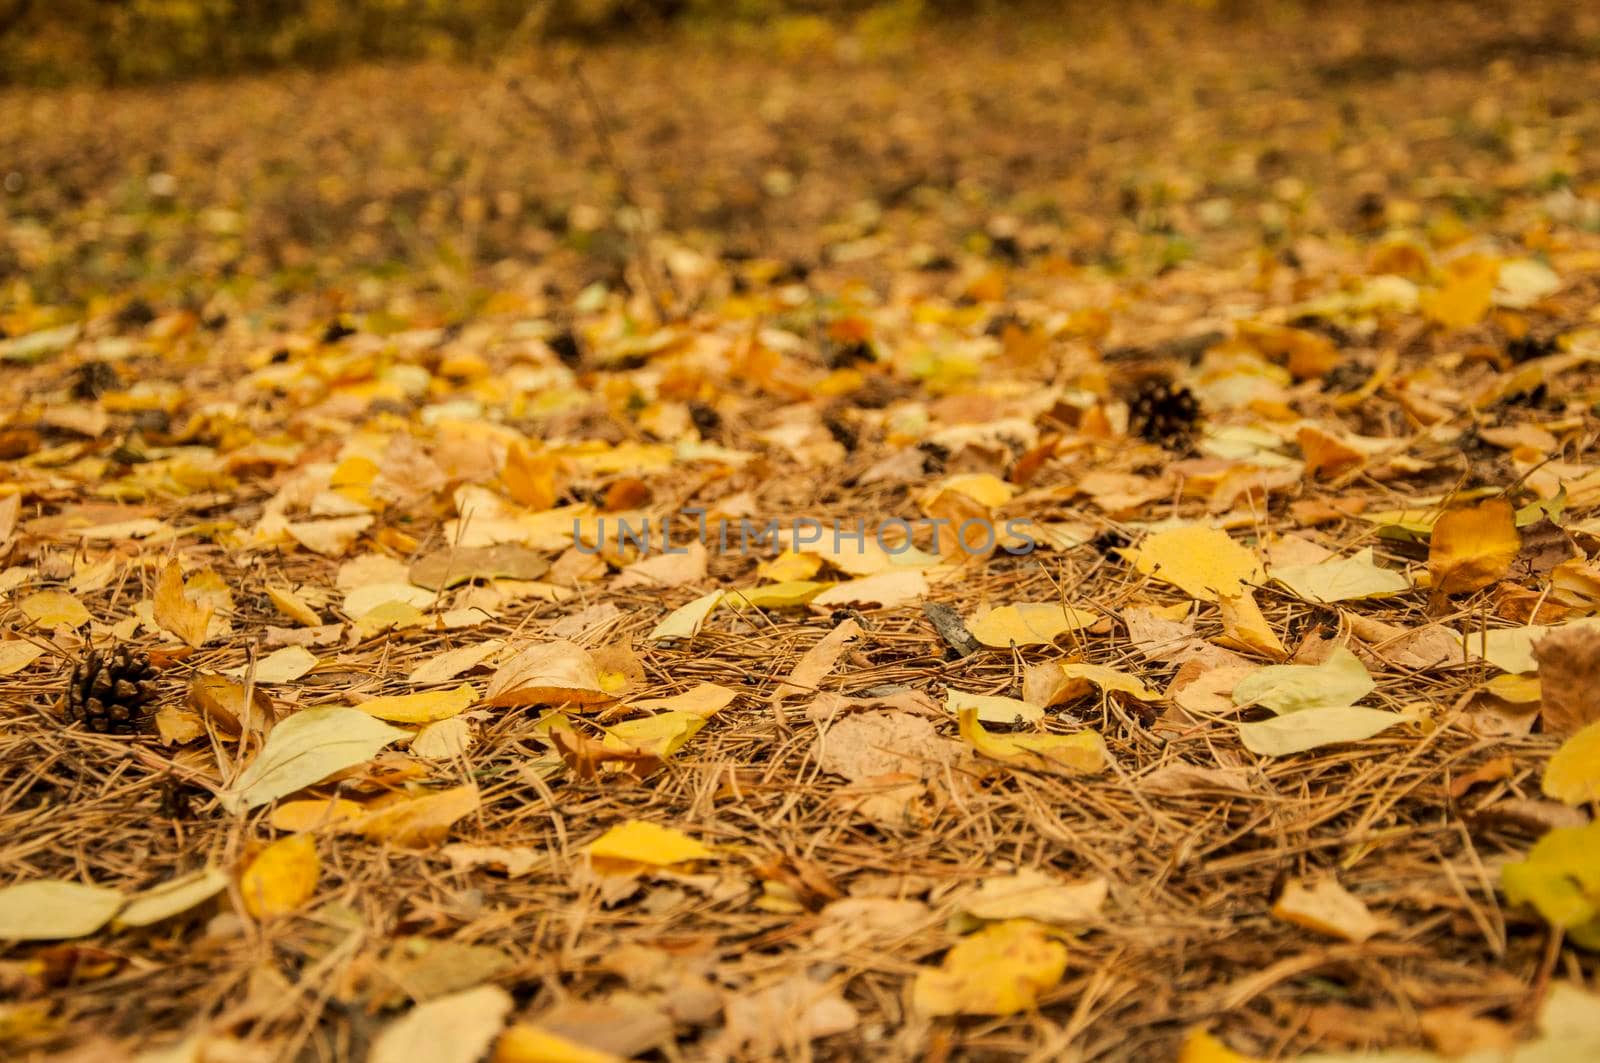 Yellow, orange and red october autumn leaves on ground in beautiful fall park. Fallen golden autumn leaves close up view on ground in sunny morning light yard. November nature macro leaf background by inxti